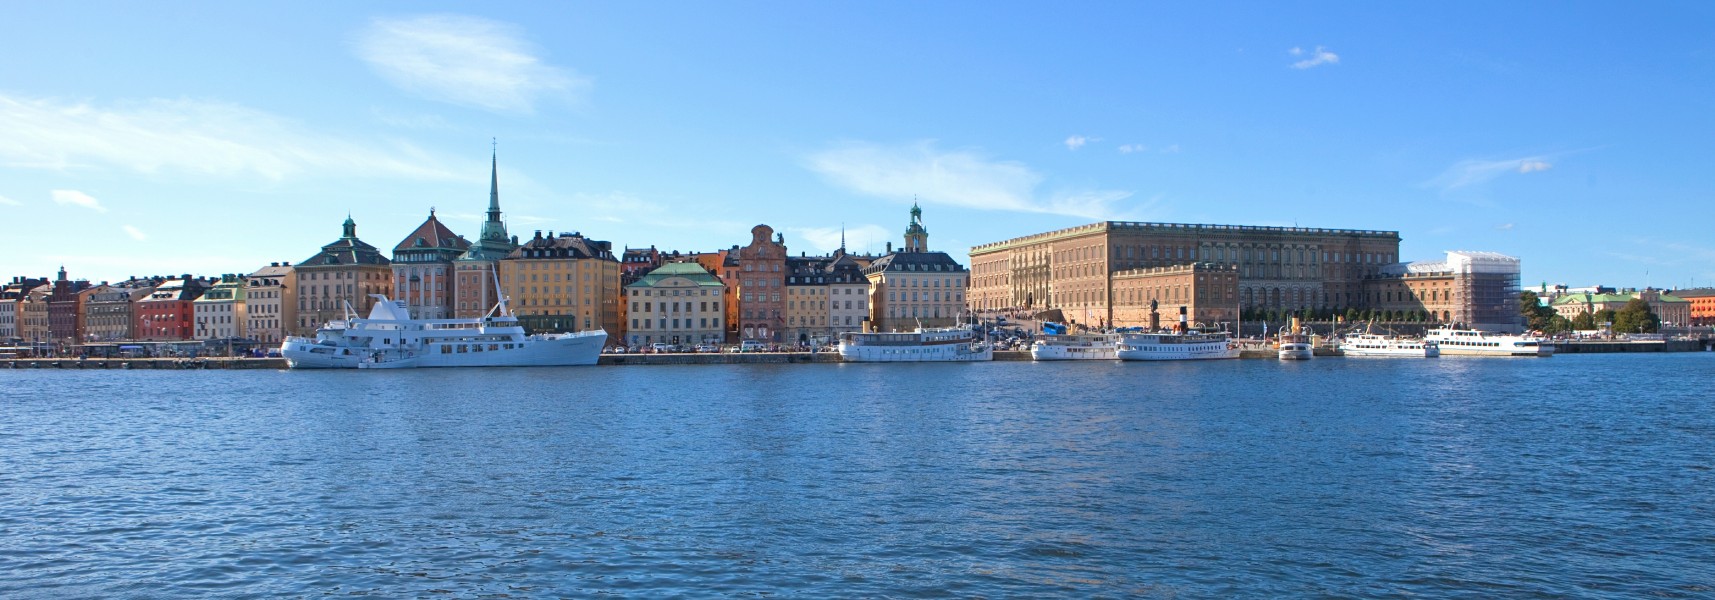 Waterfronts in Sweden 7 2011